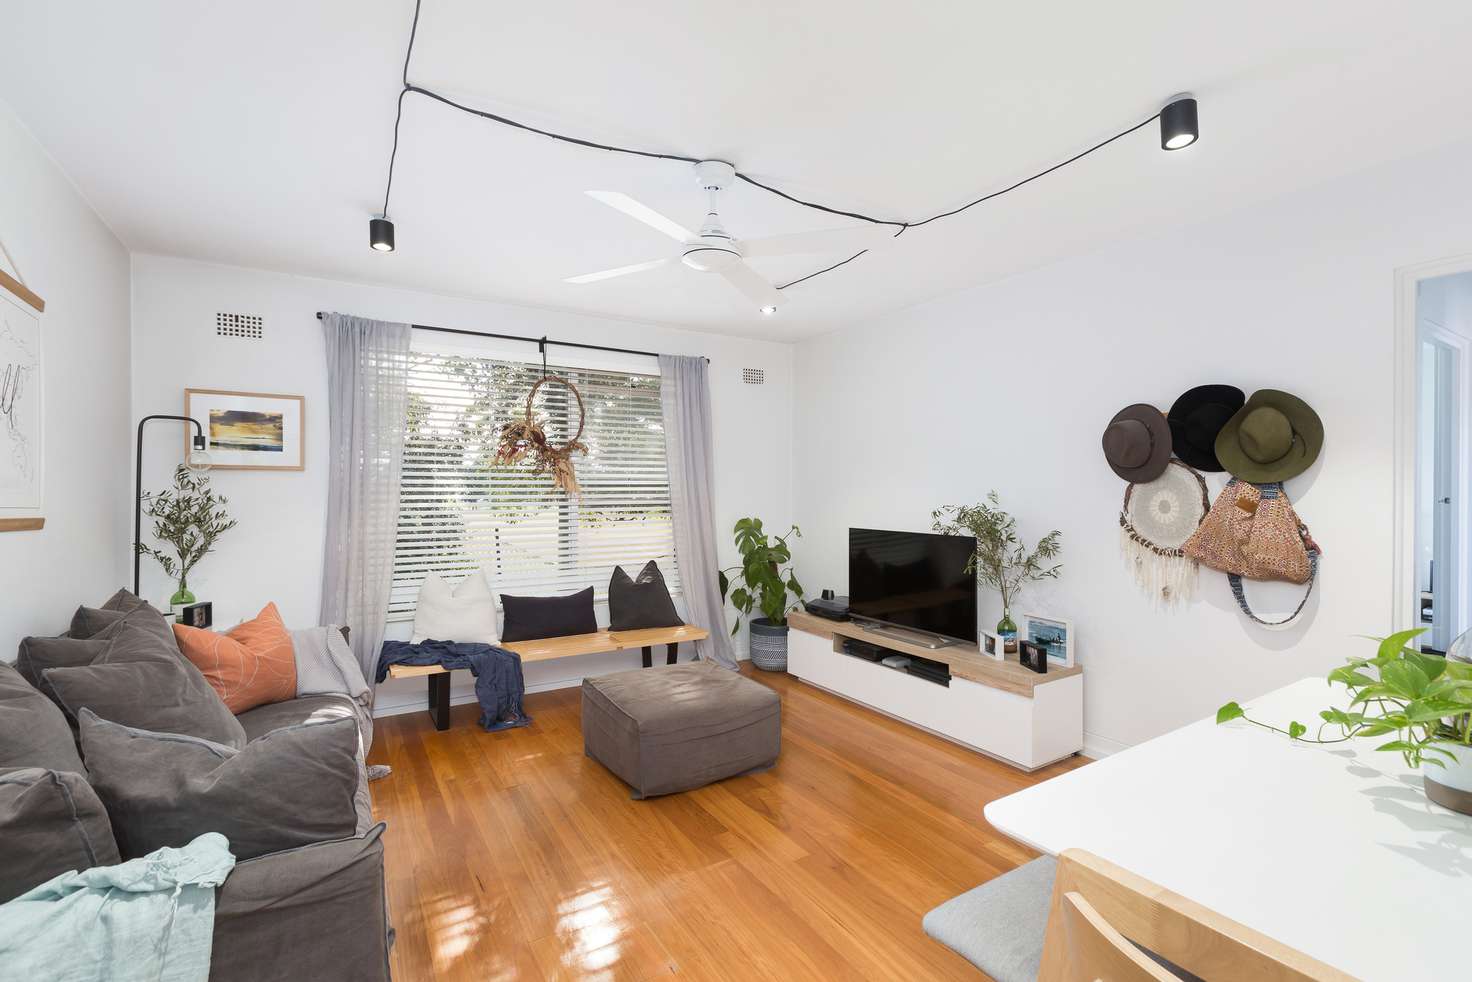 Main view of Homely apartment listing, 17/53 Caronia Avenue, Woolooware NSW 2230